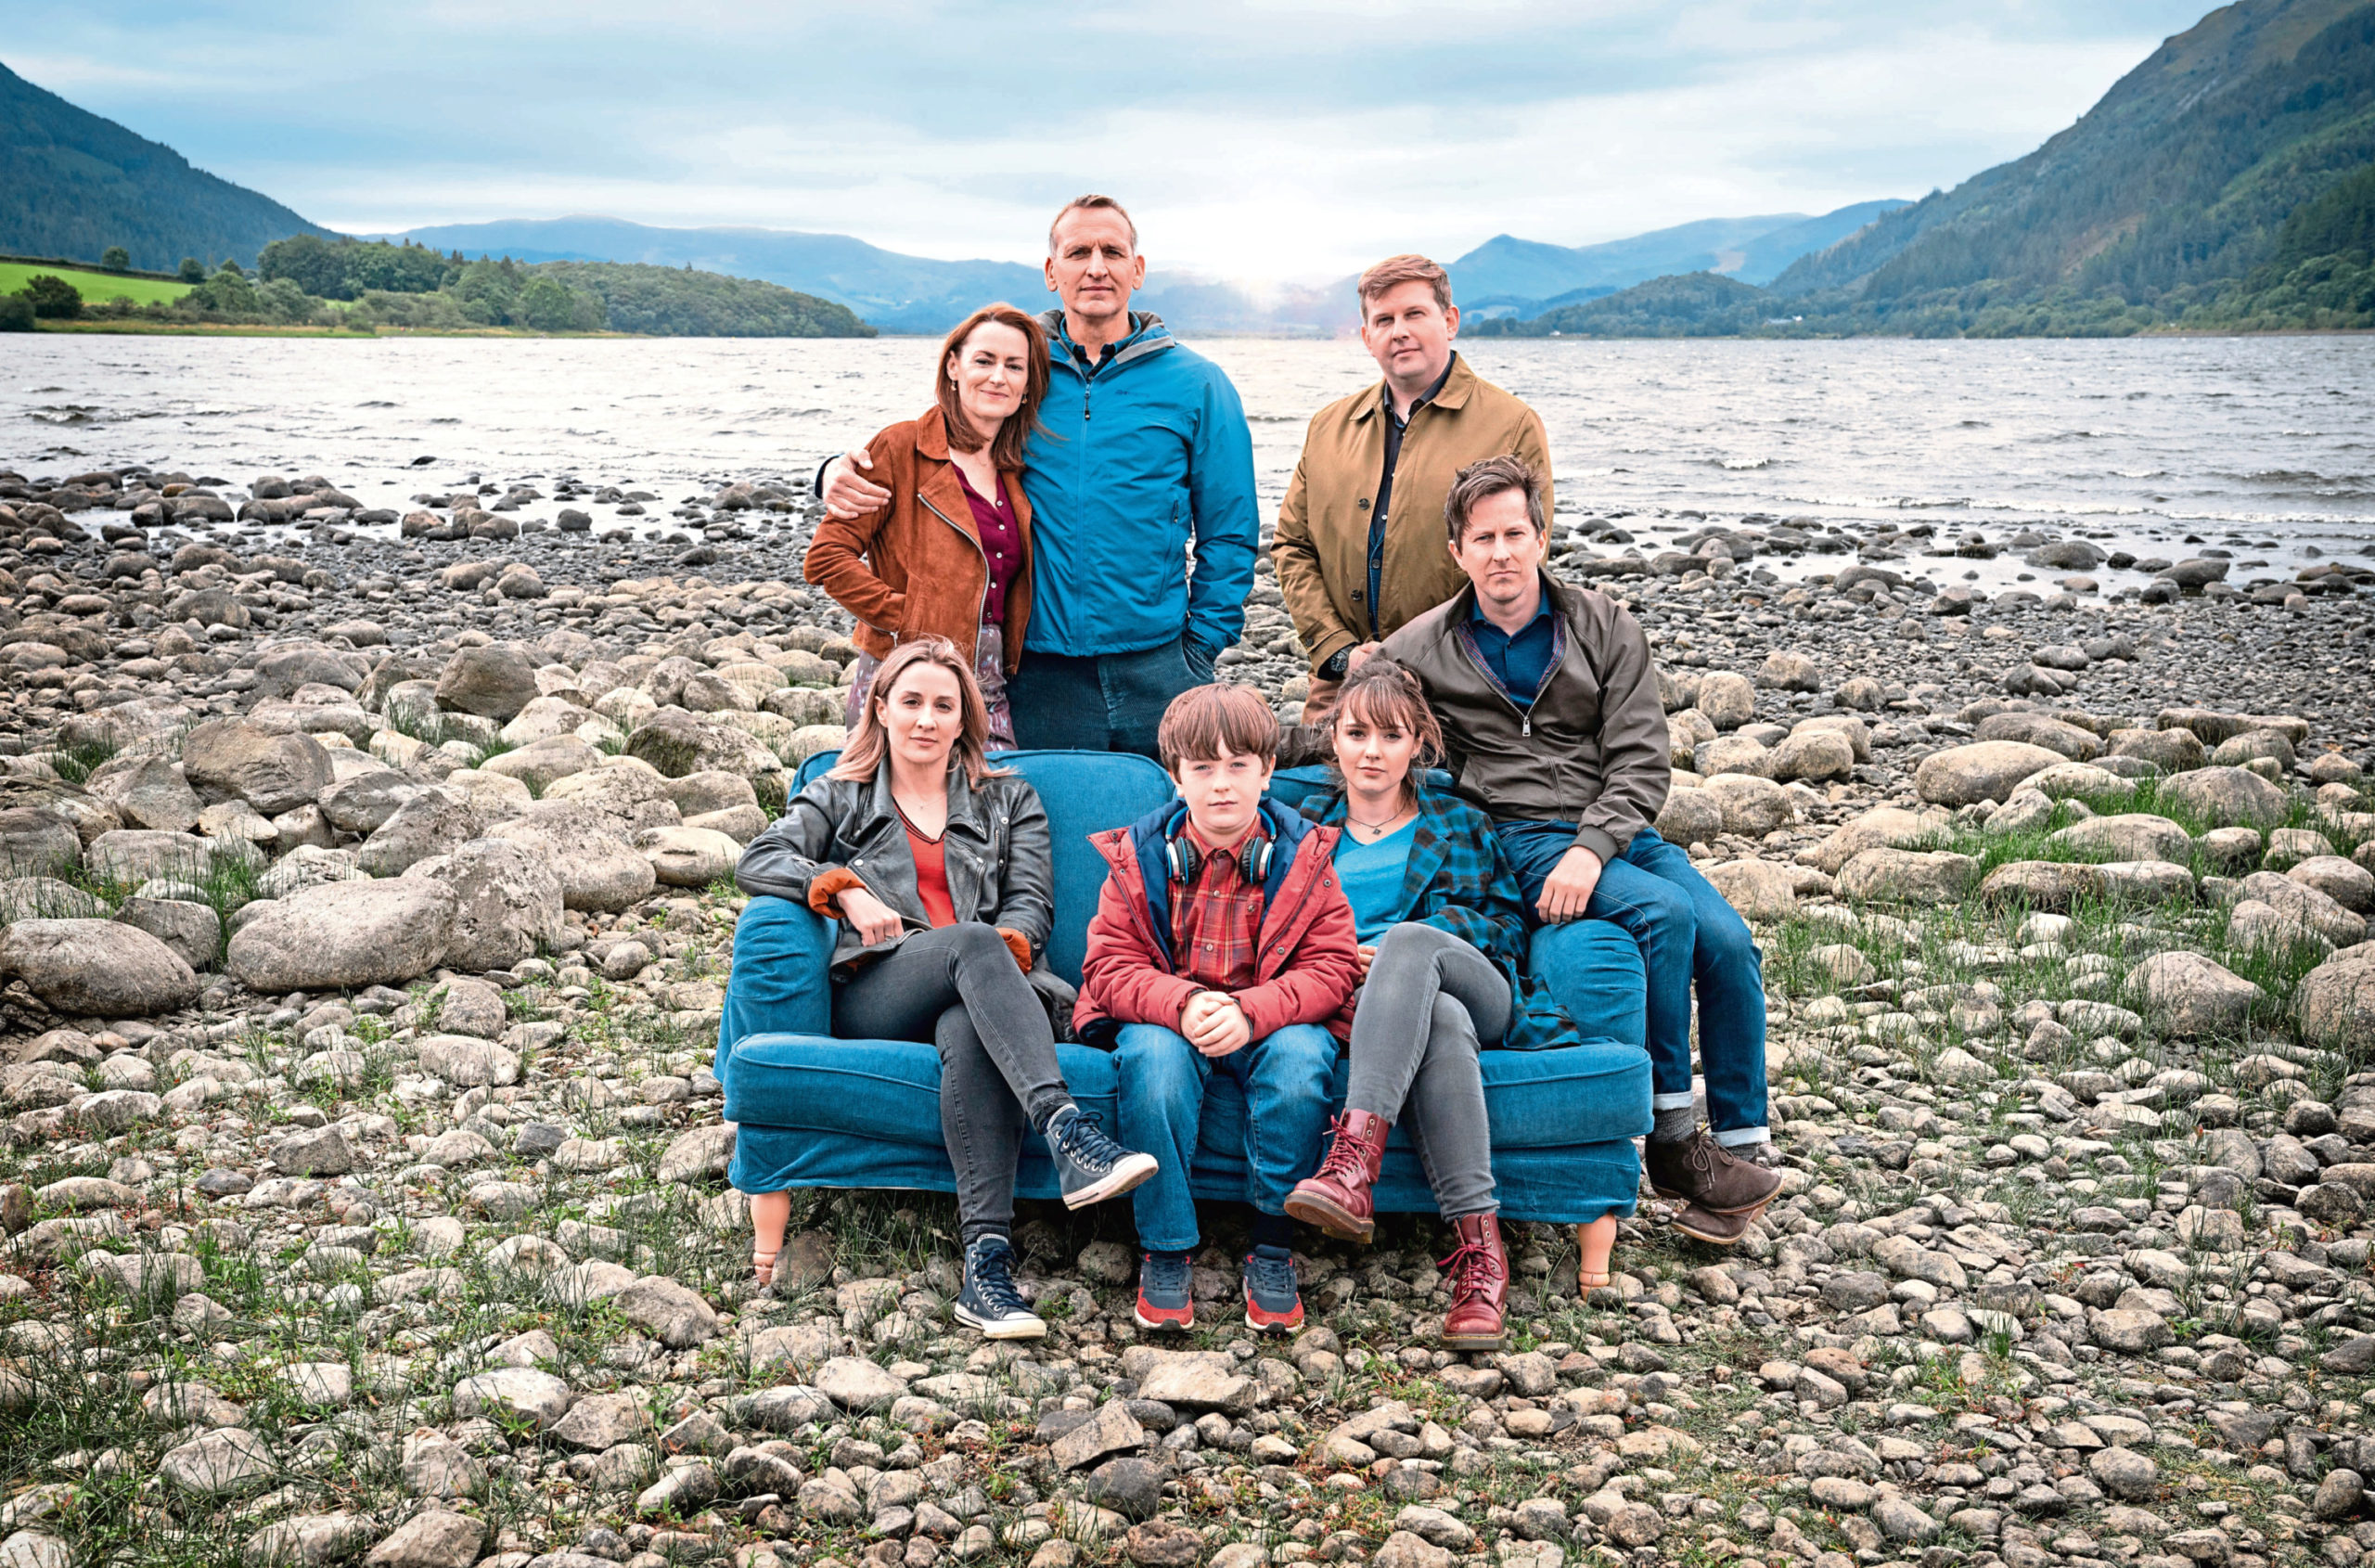 On the sofa from left: Morven Christie as Alison, Max Vento as Joe, Molly Wright as Rebecca, Lee Ingleby as Paul. Back row: Pooky Quesnel as Louise, Christopher Eccleston as Maurice and Greg McHugh as Eddie